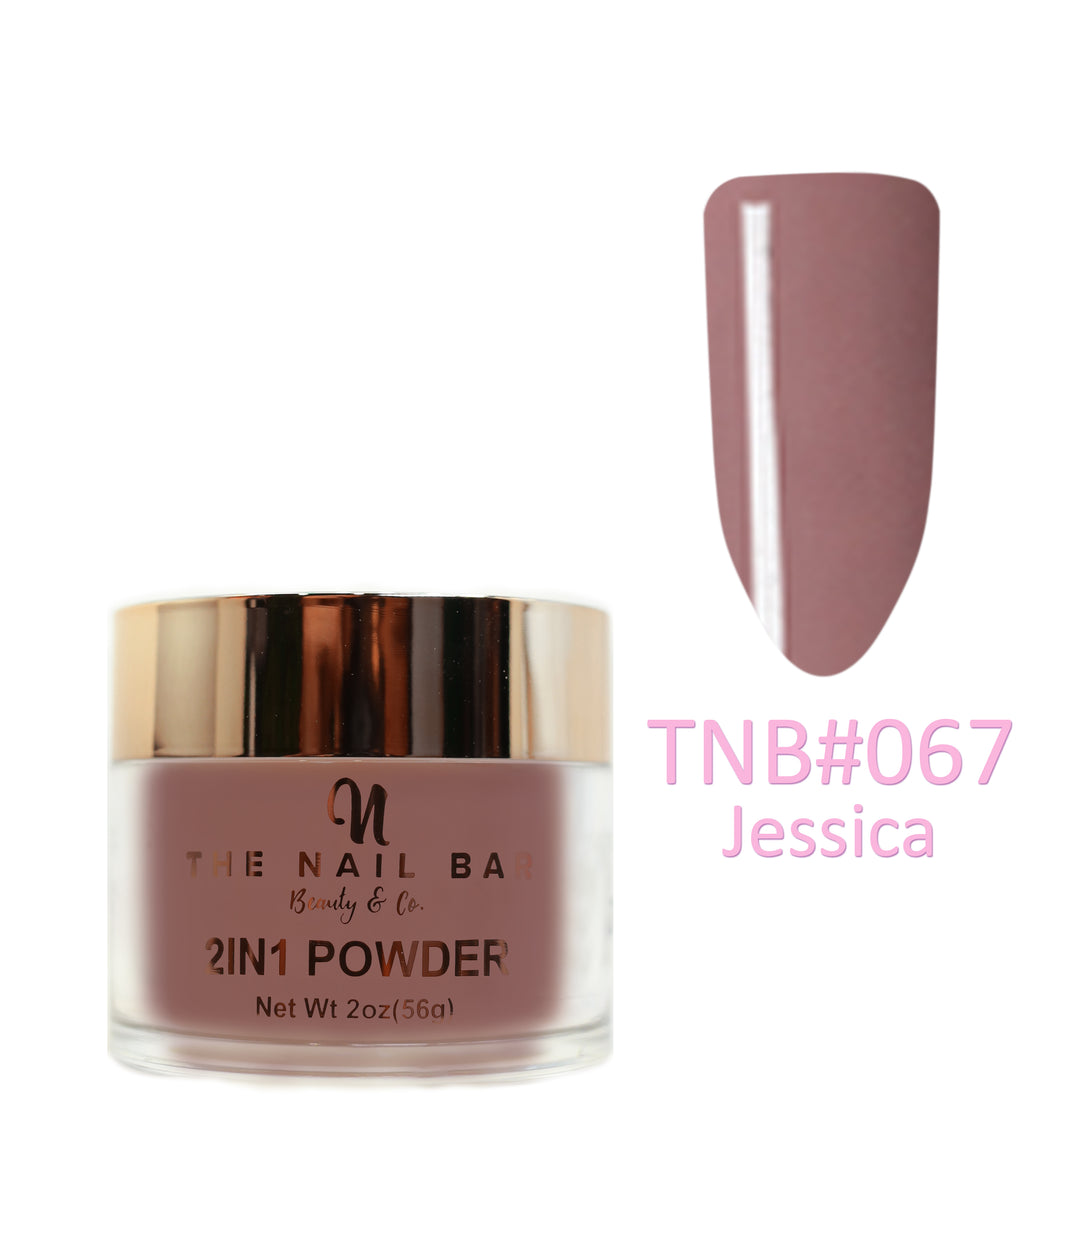 2-In-1 Dipping/Acrylic colour powder (2oz) -Jessica - The Nail Bar Beauty & Co.